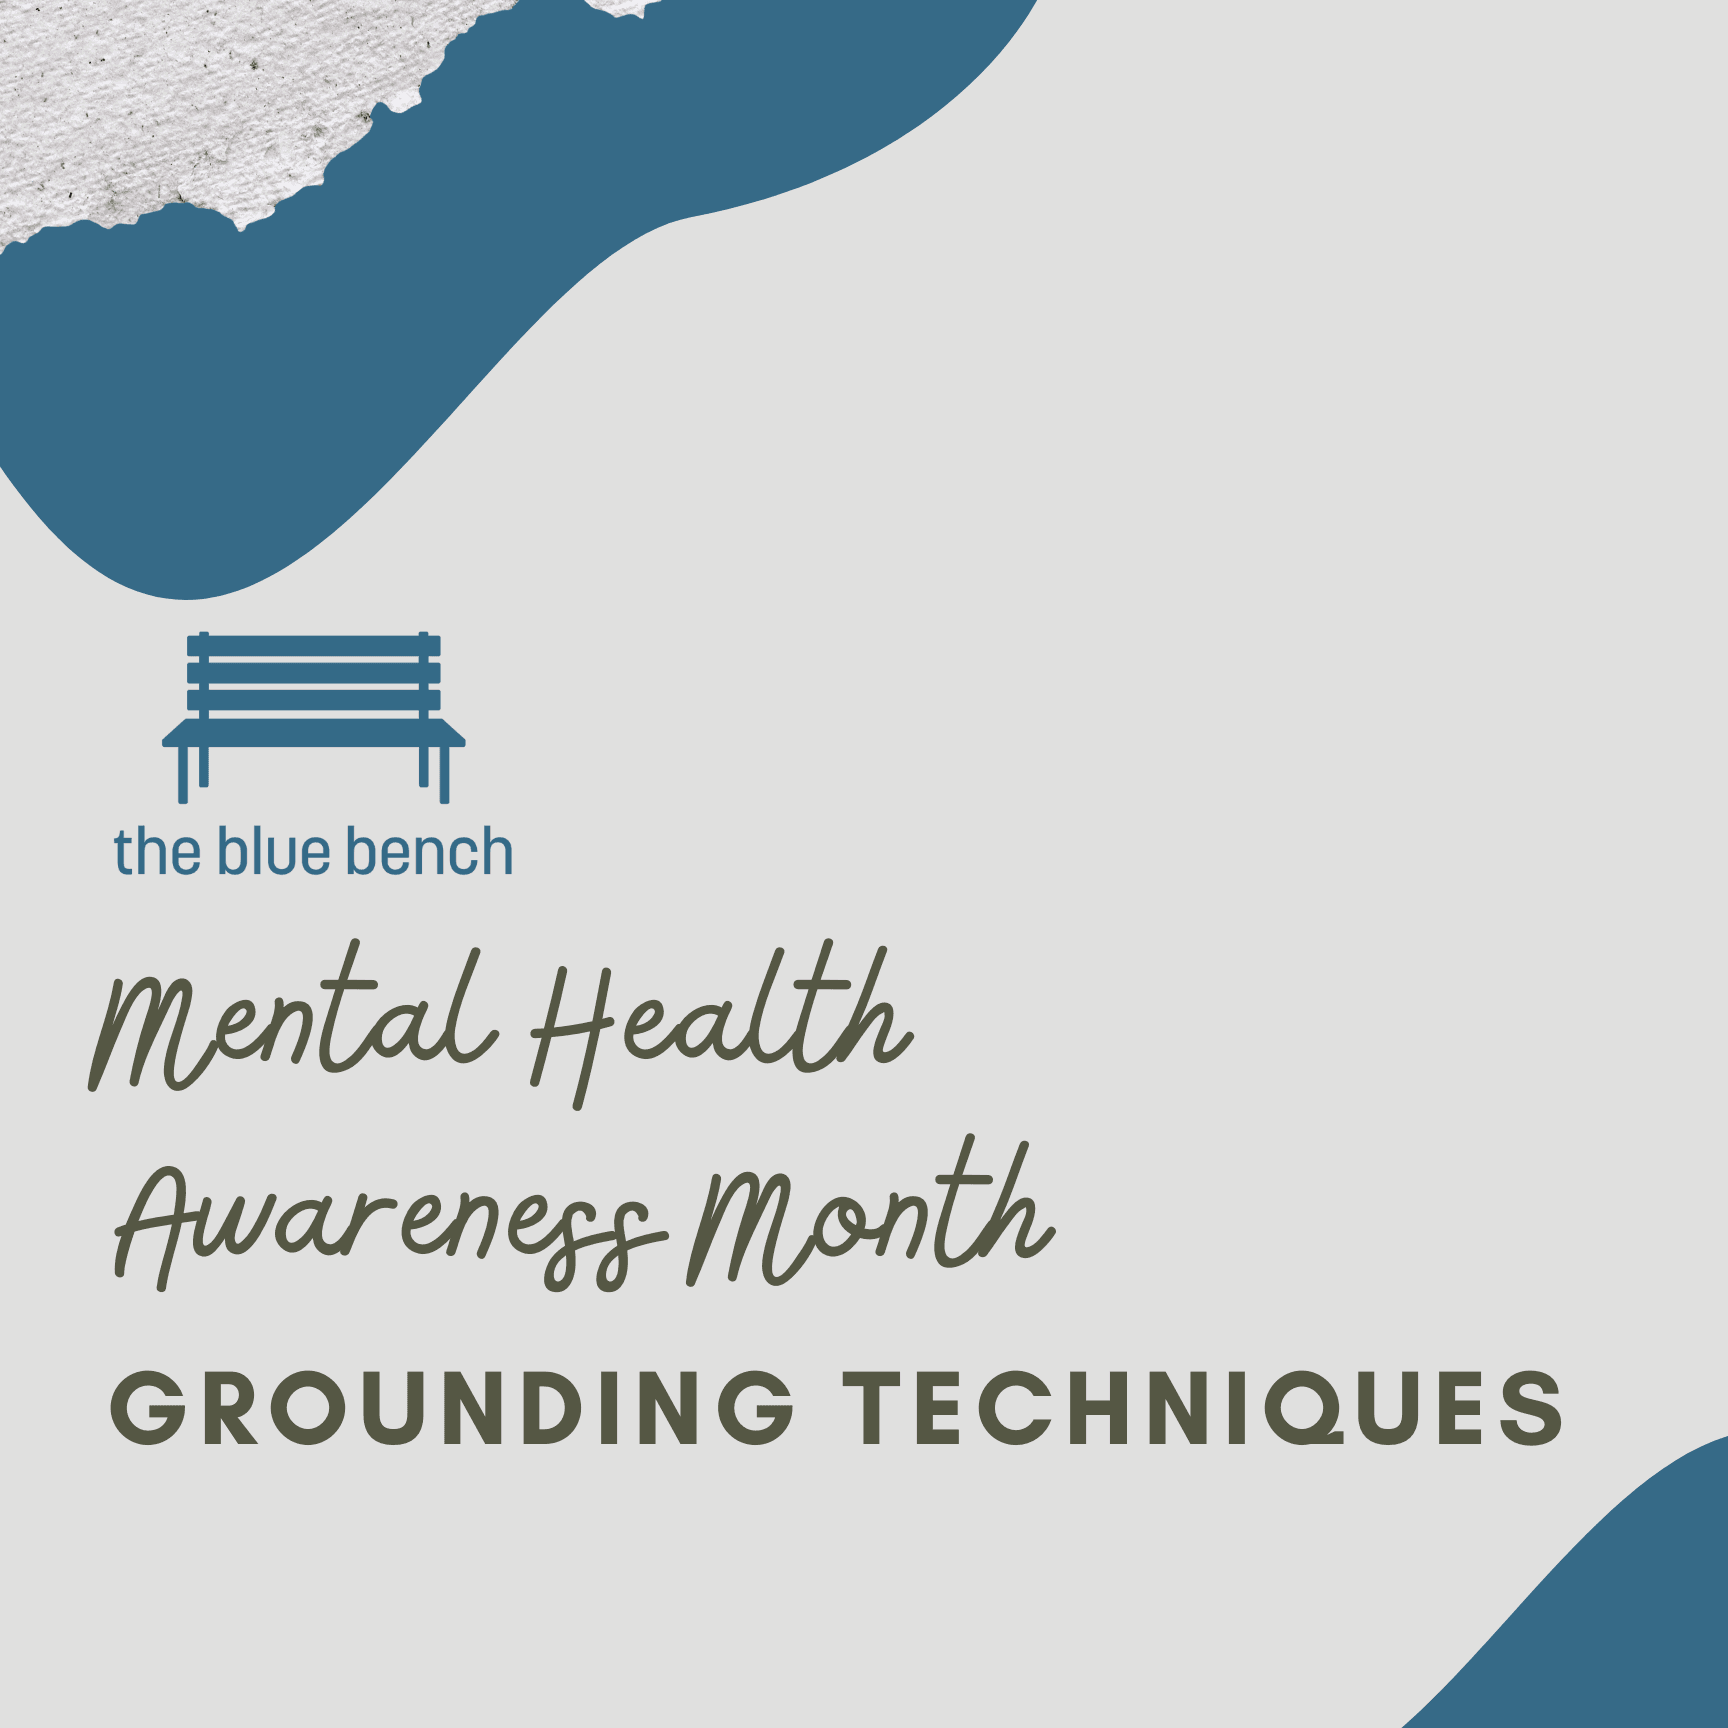 Mental Health Awareness Month: Grounding Techniques